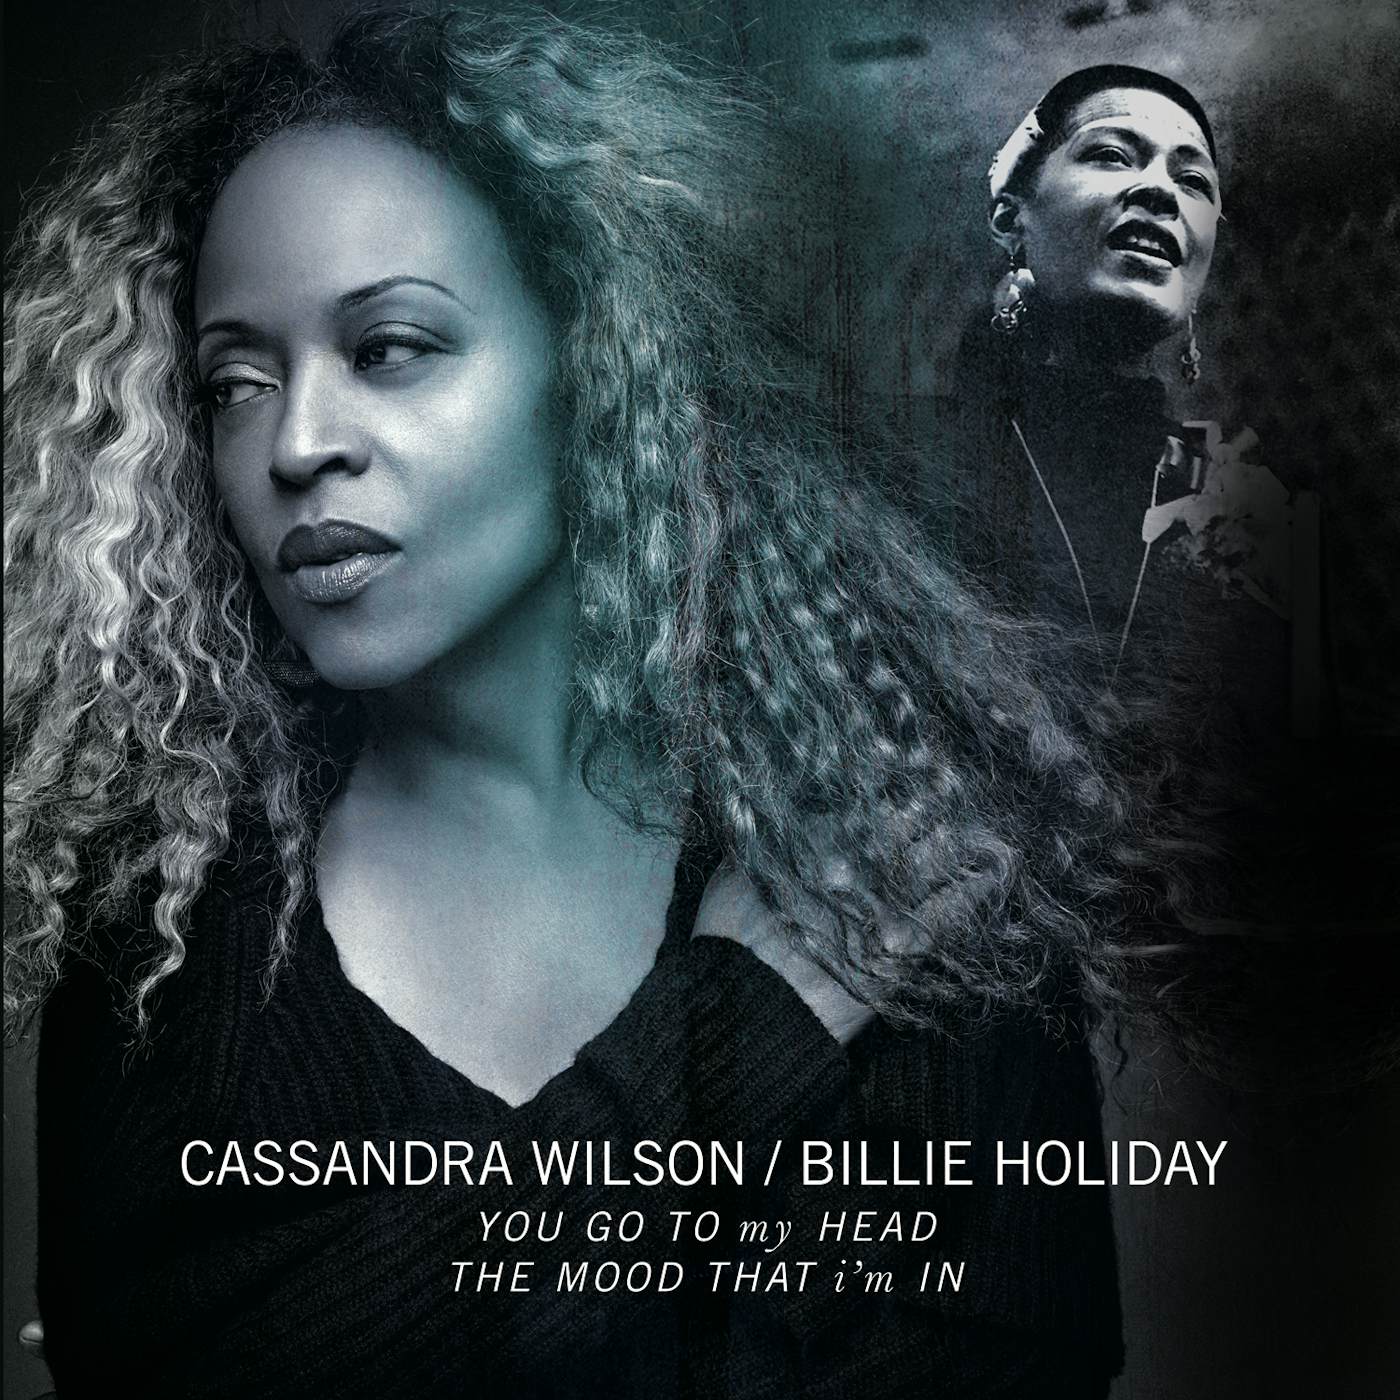 Cassandra Wilson You Go To My Head / The Mood That I'm In Vinyl Record